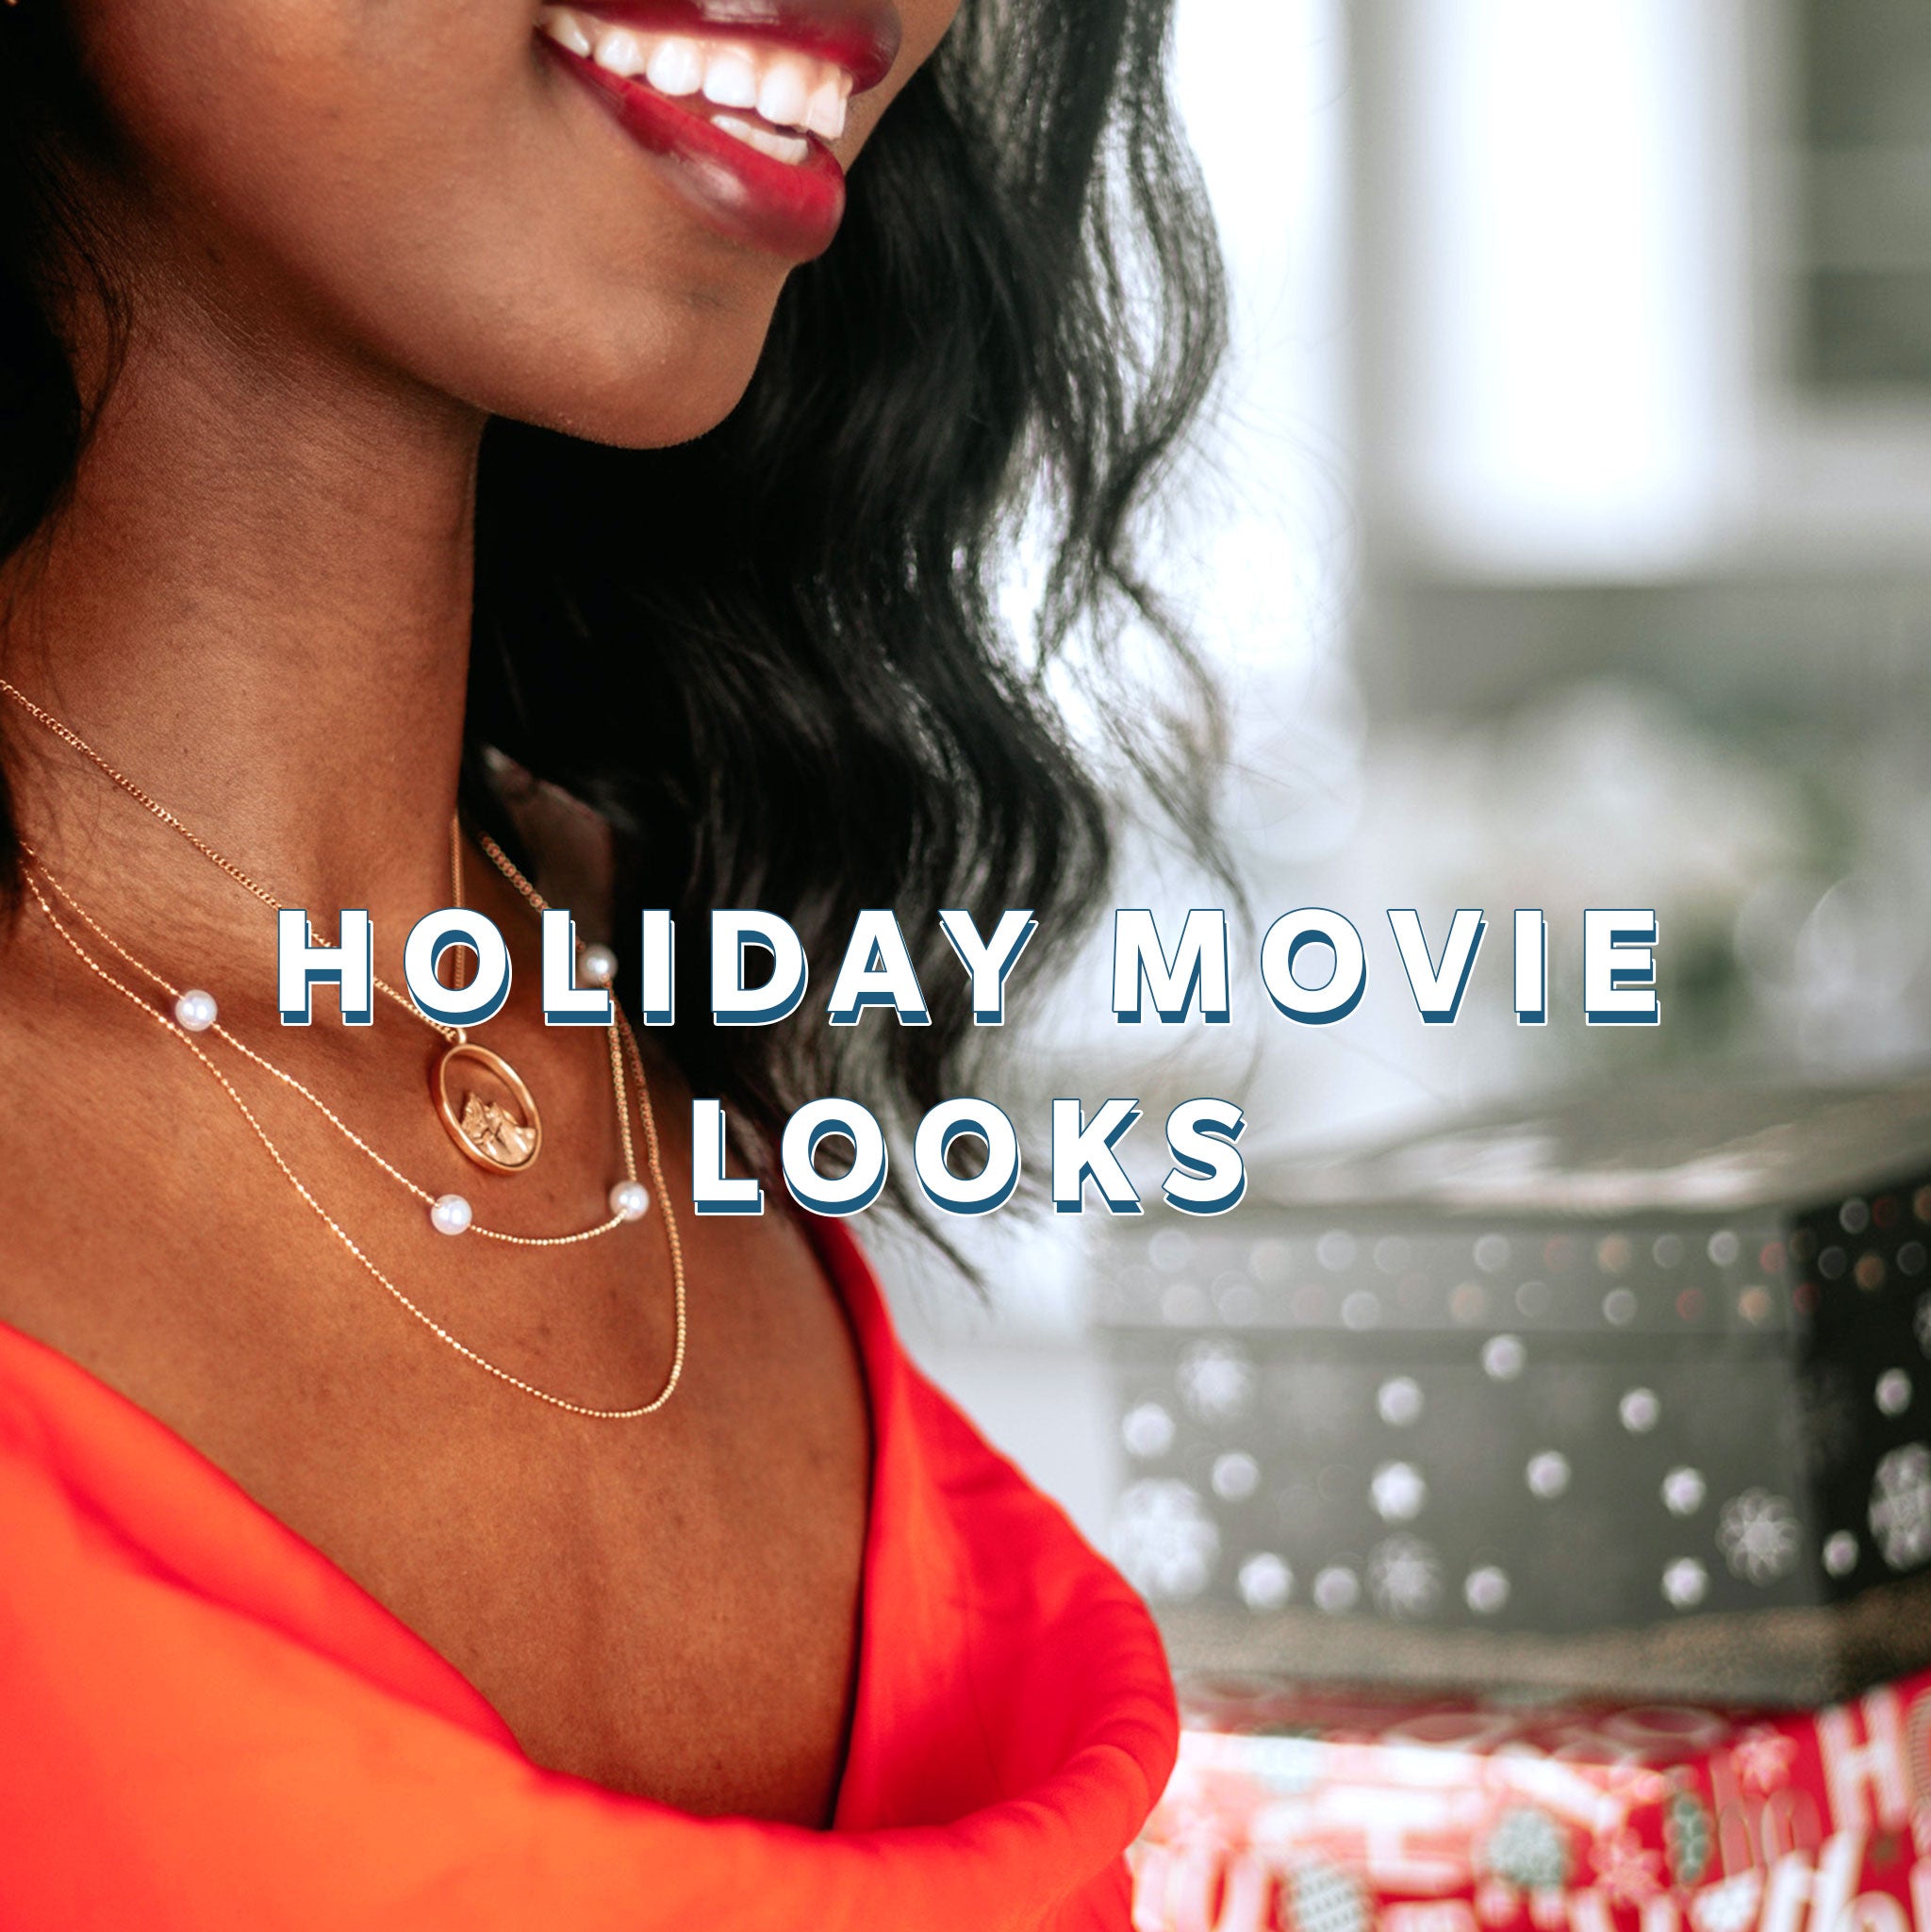 Get The Look: Holiday Movies